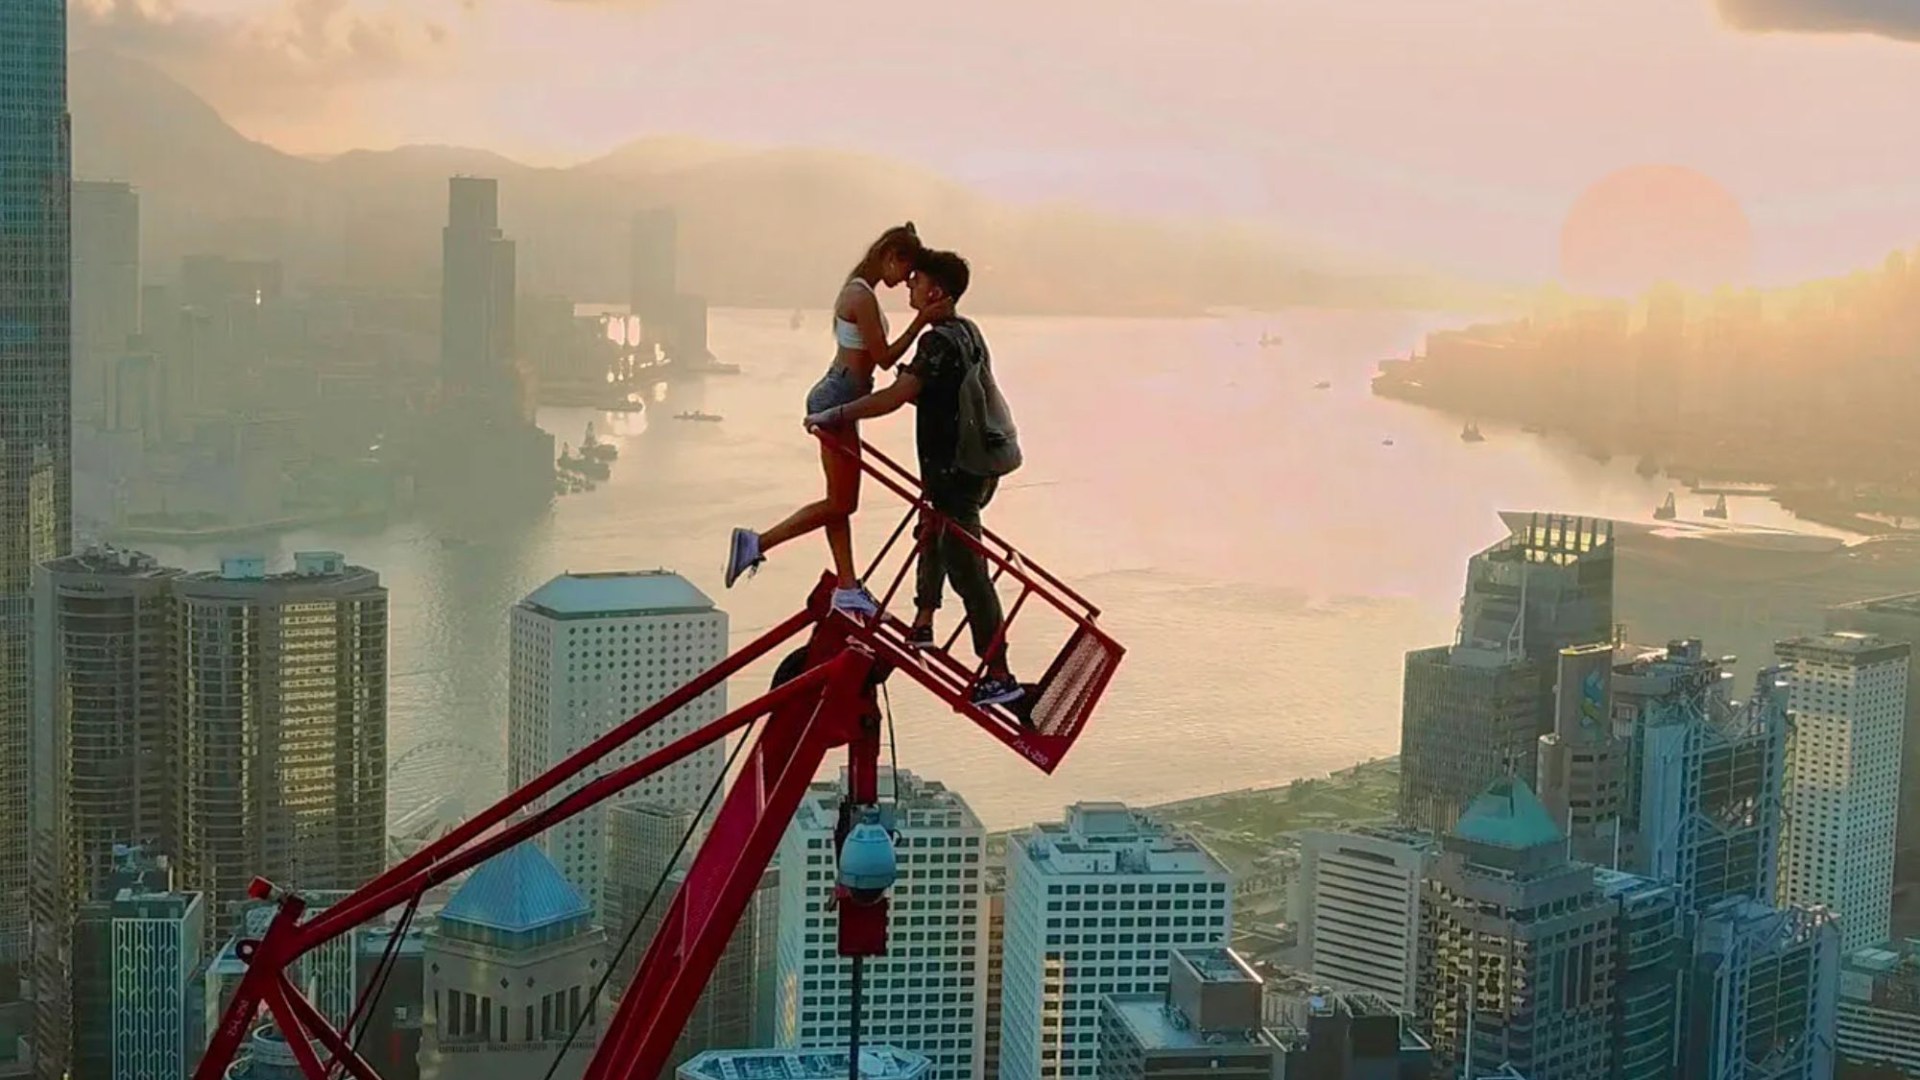 One wrong move & we risk death’, the couple who fell in love scaling world’s skyscrapers without safety harnesses [Video]